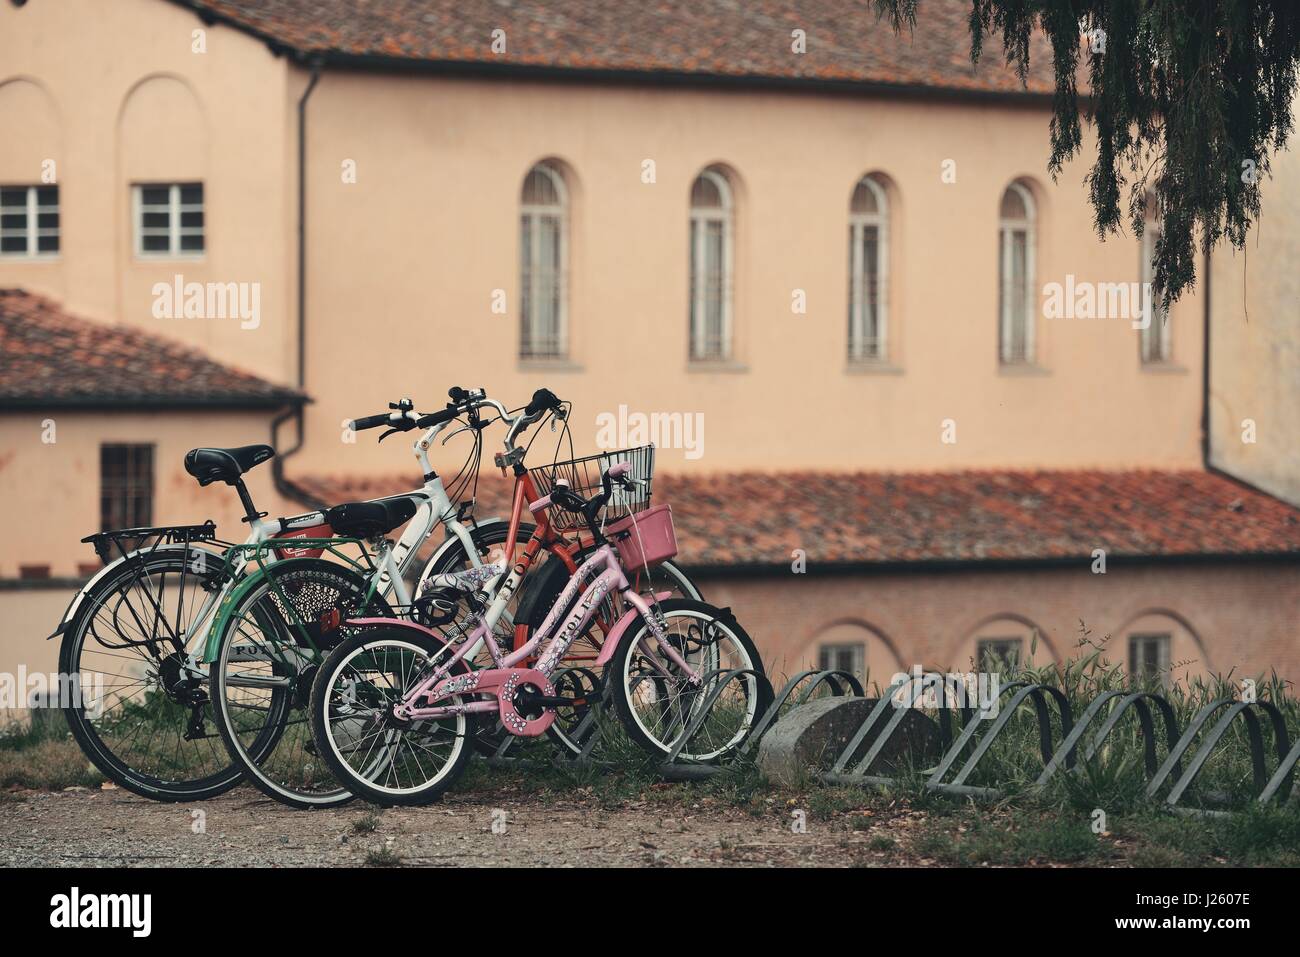 LUCCA - MAY 19: Bikes with old church on May 19, 2016 in Lucca, Italy. It is famous for its well preserved Renaissance-era city walls and the tourism Stock Photo